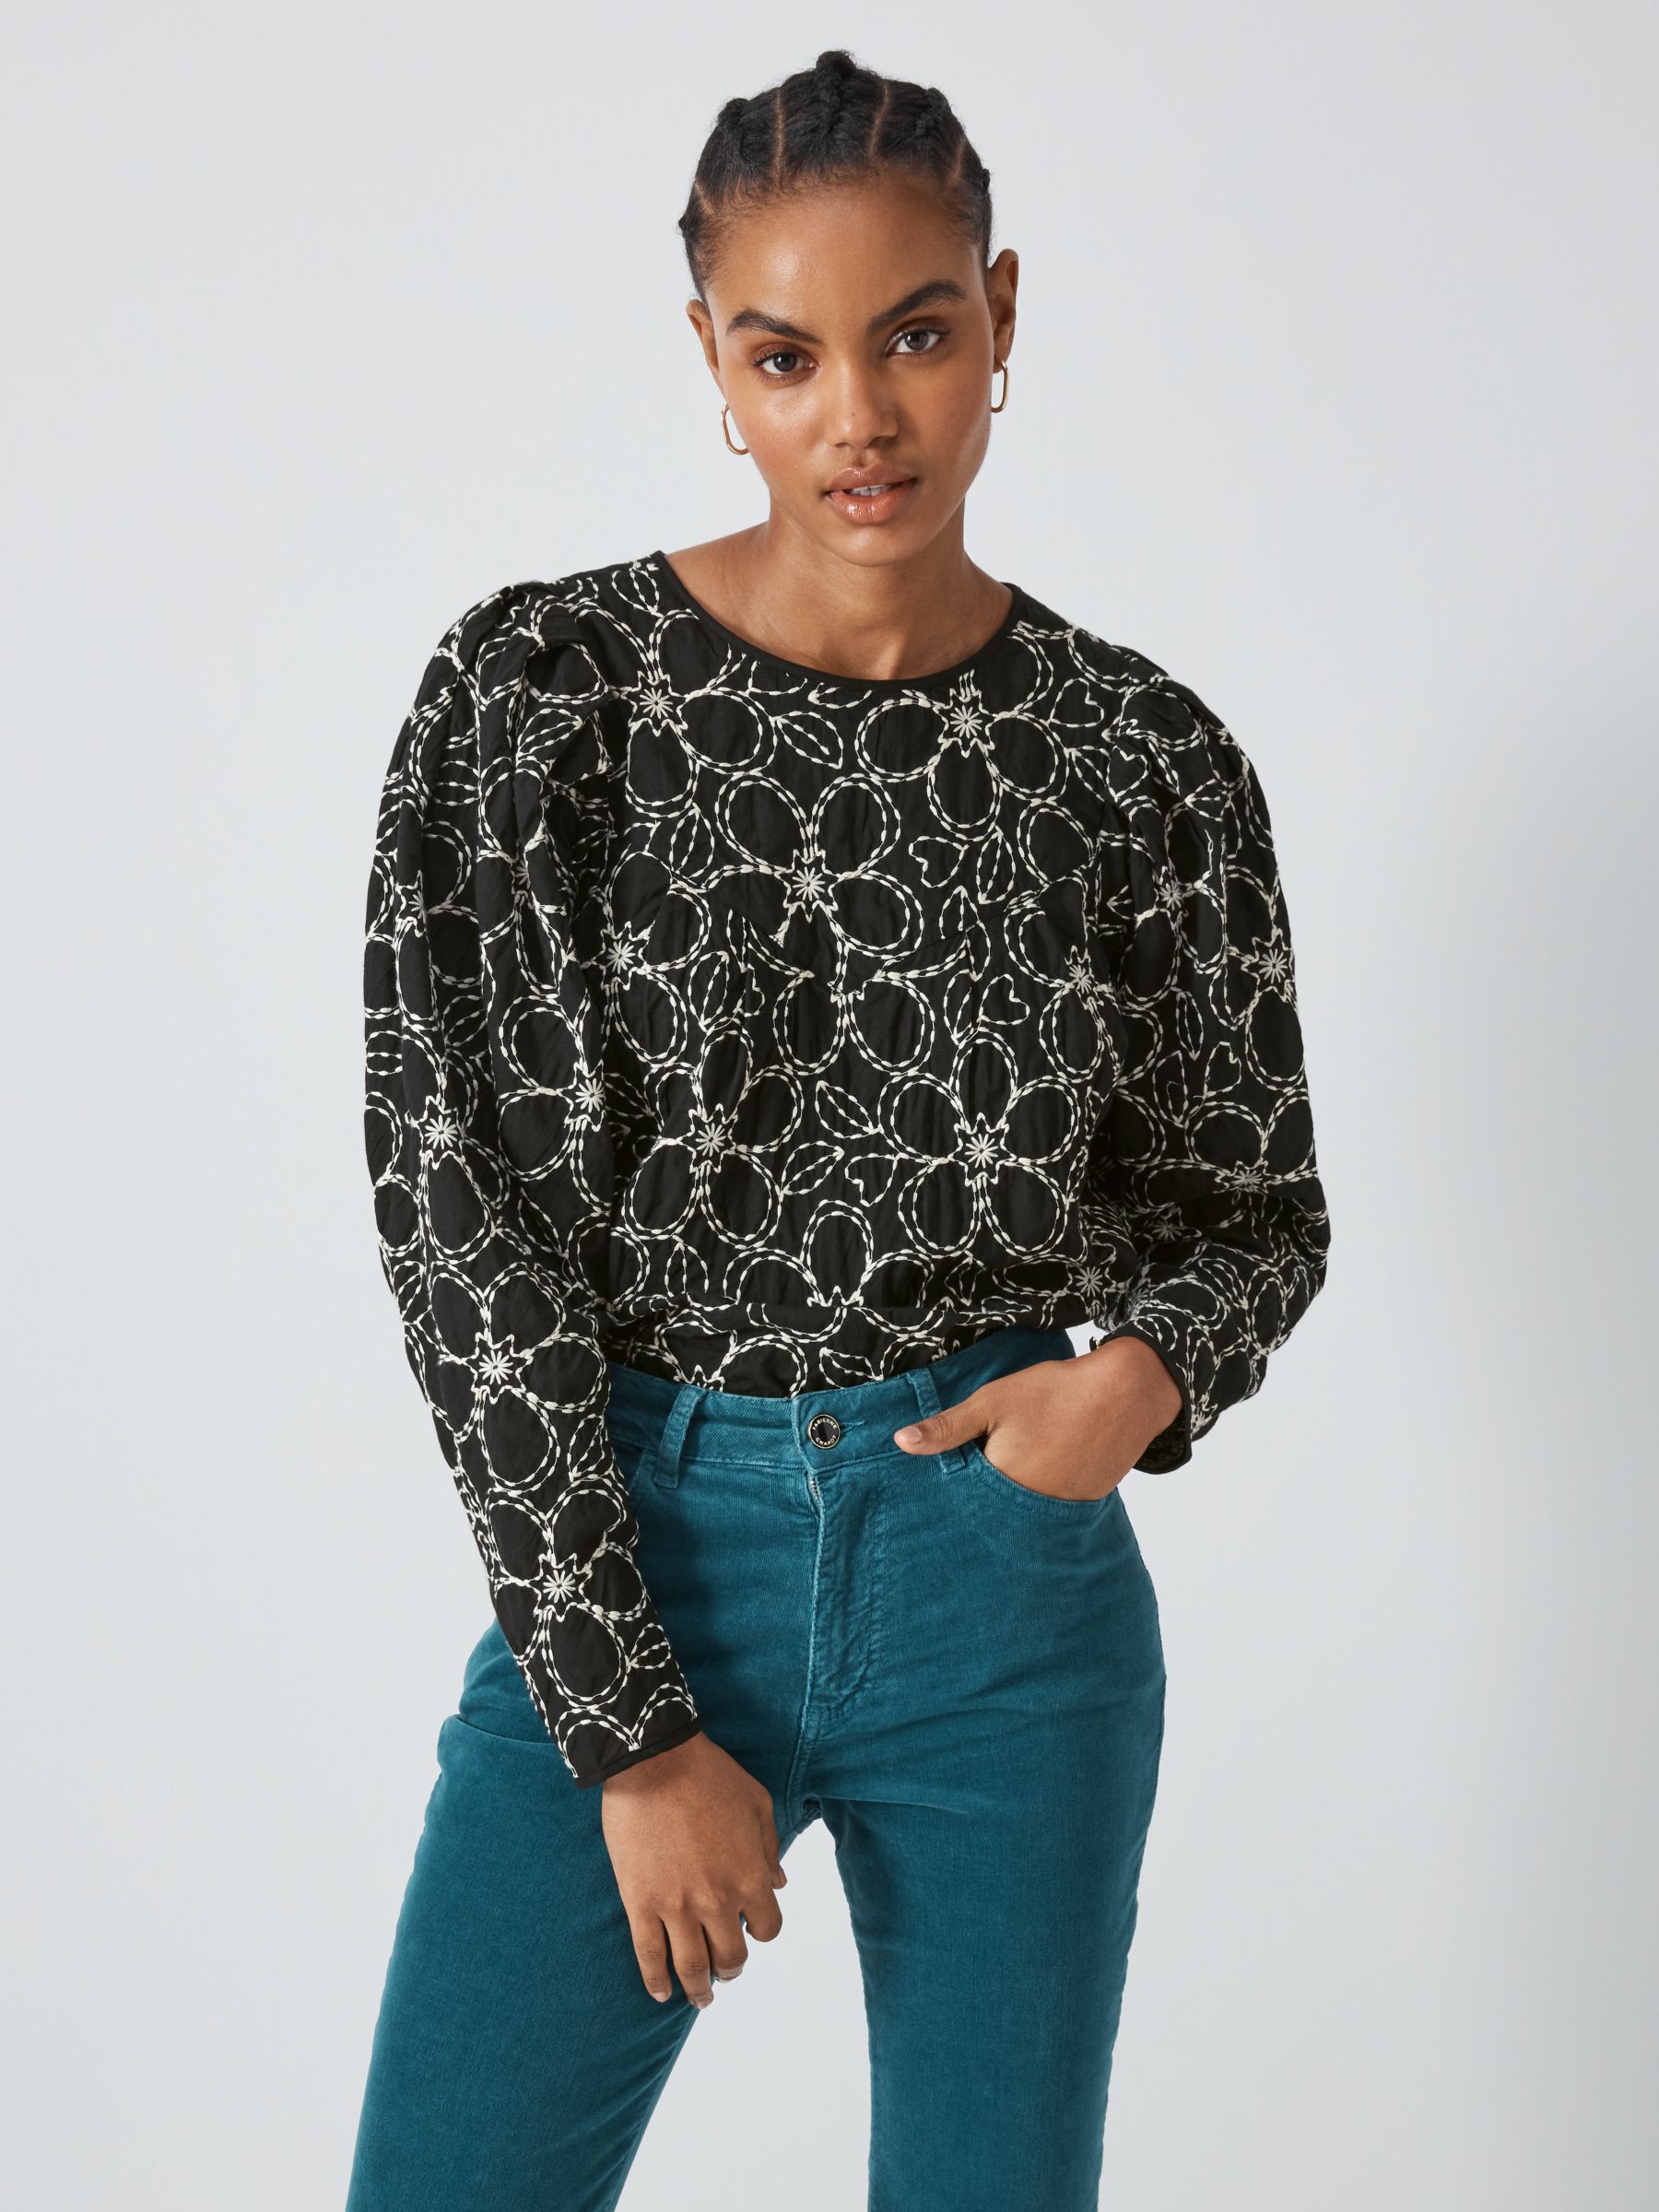 Fabienne Chapot Mya Floral Embroidered Top, Black at John Lewis & Partners